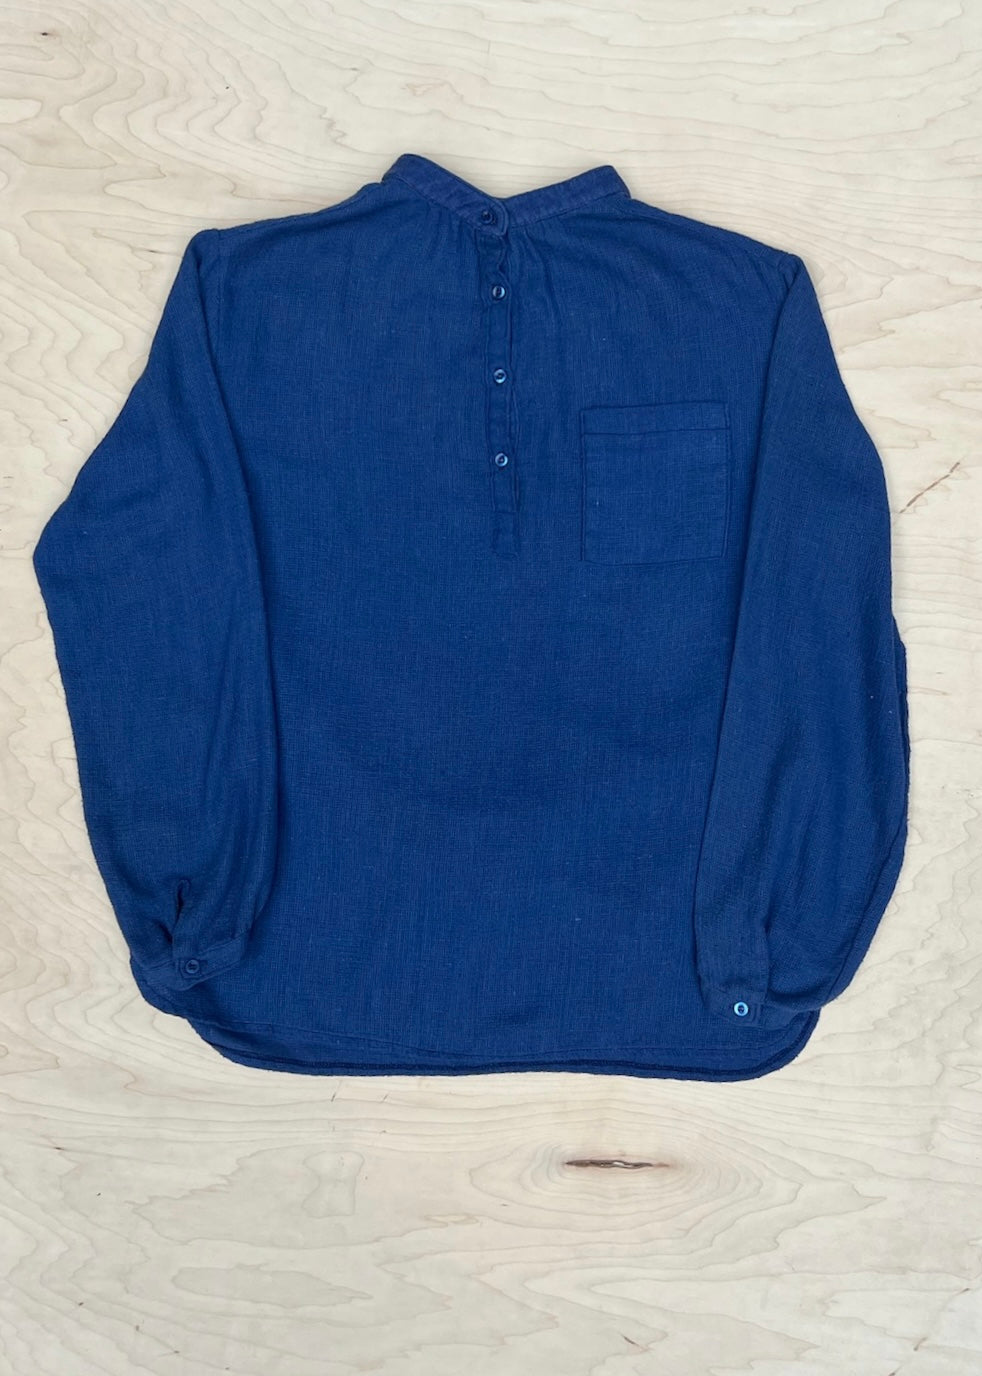 1960s BLUE MESH LONG SLEEVE WITH QUARTER BUTTON